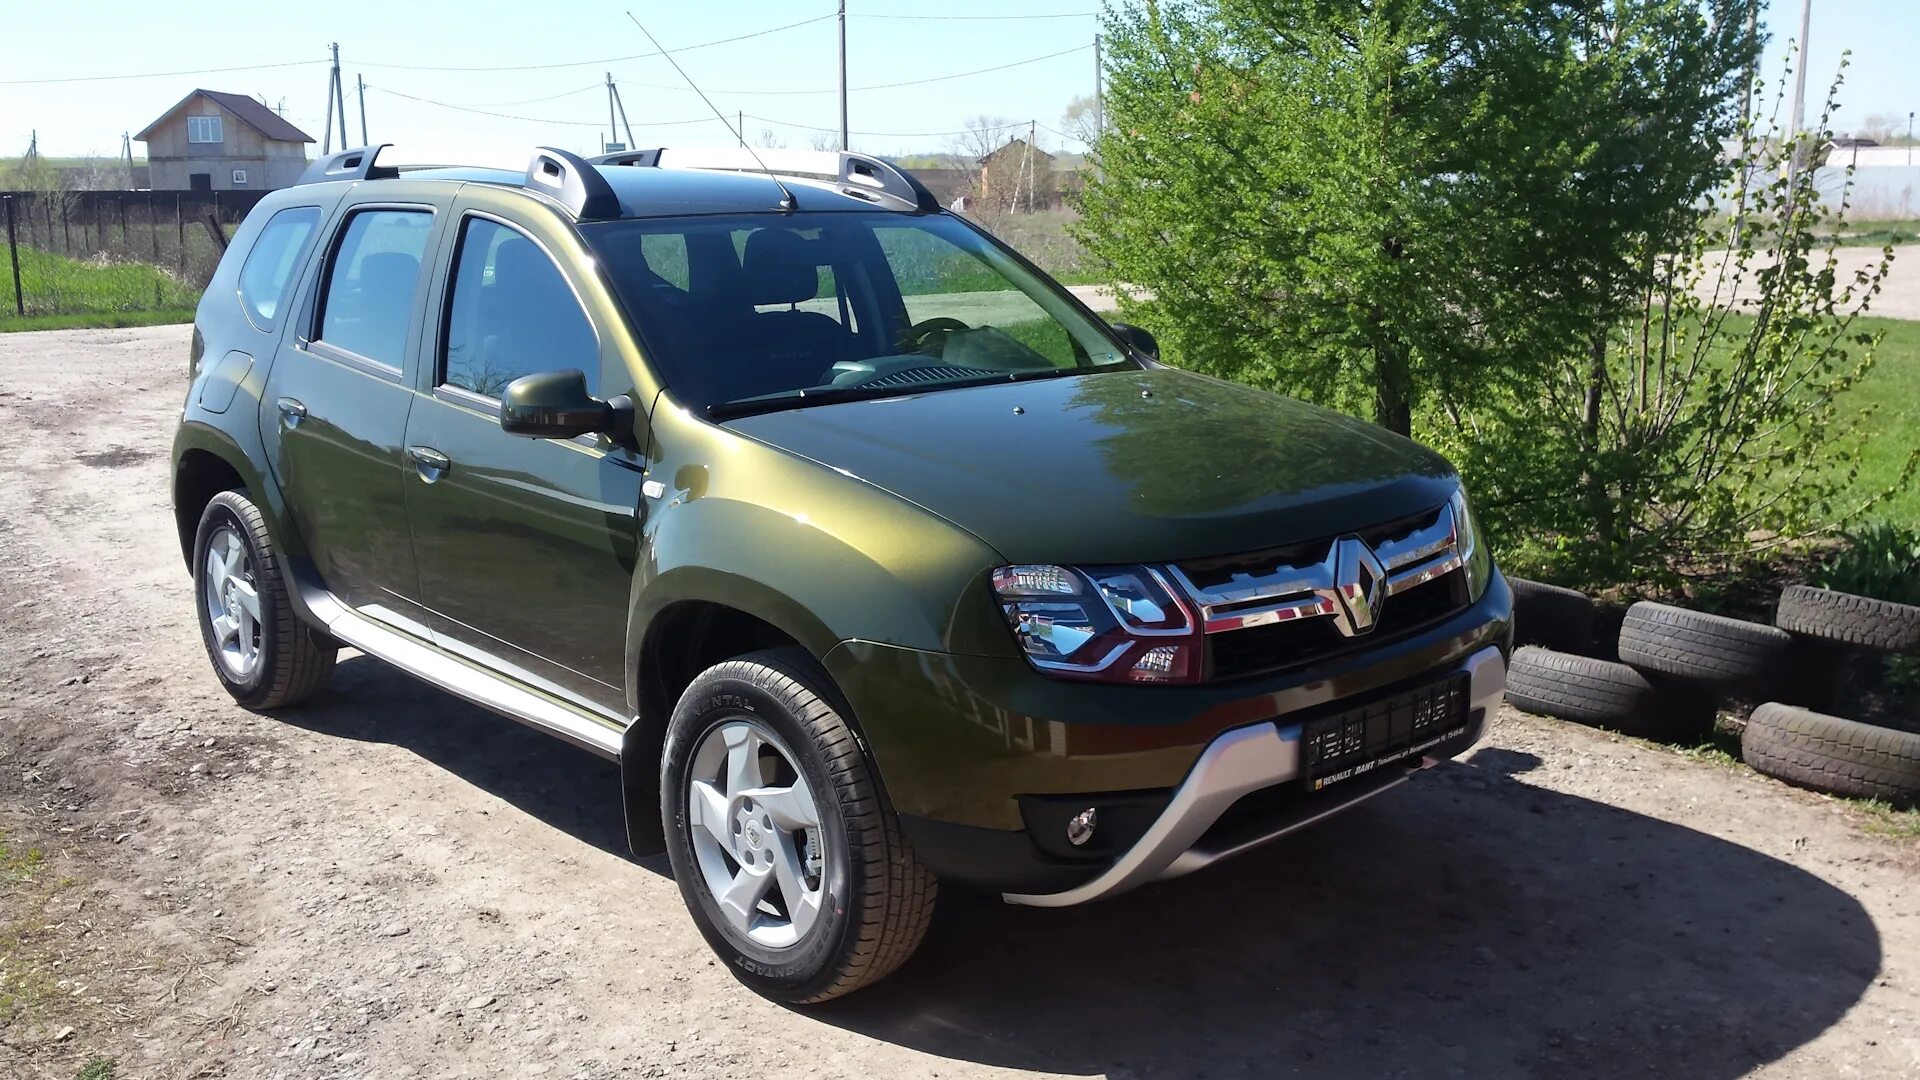 Renault Duster 1.5. Renault Duster DCI. Рено Дастер 1.5 дизель. Duster 2 1.5 DCI. Рено дастер дизель бу купить